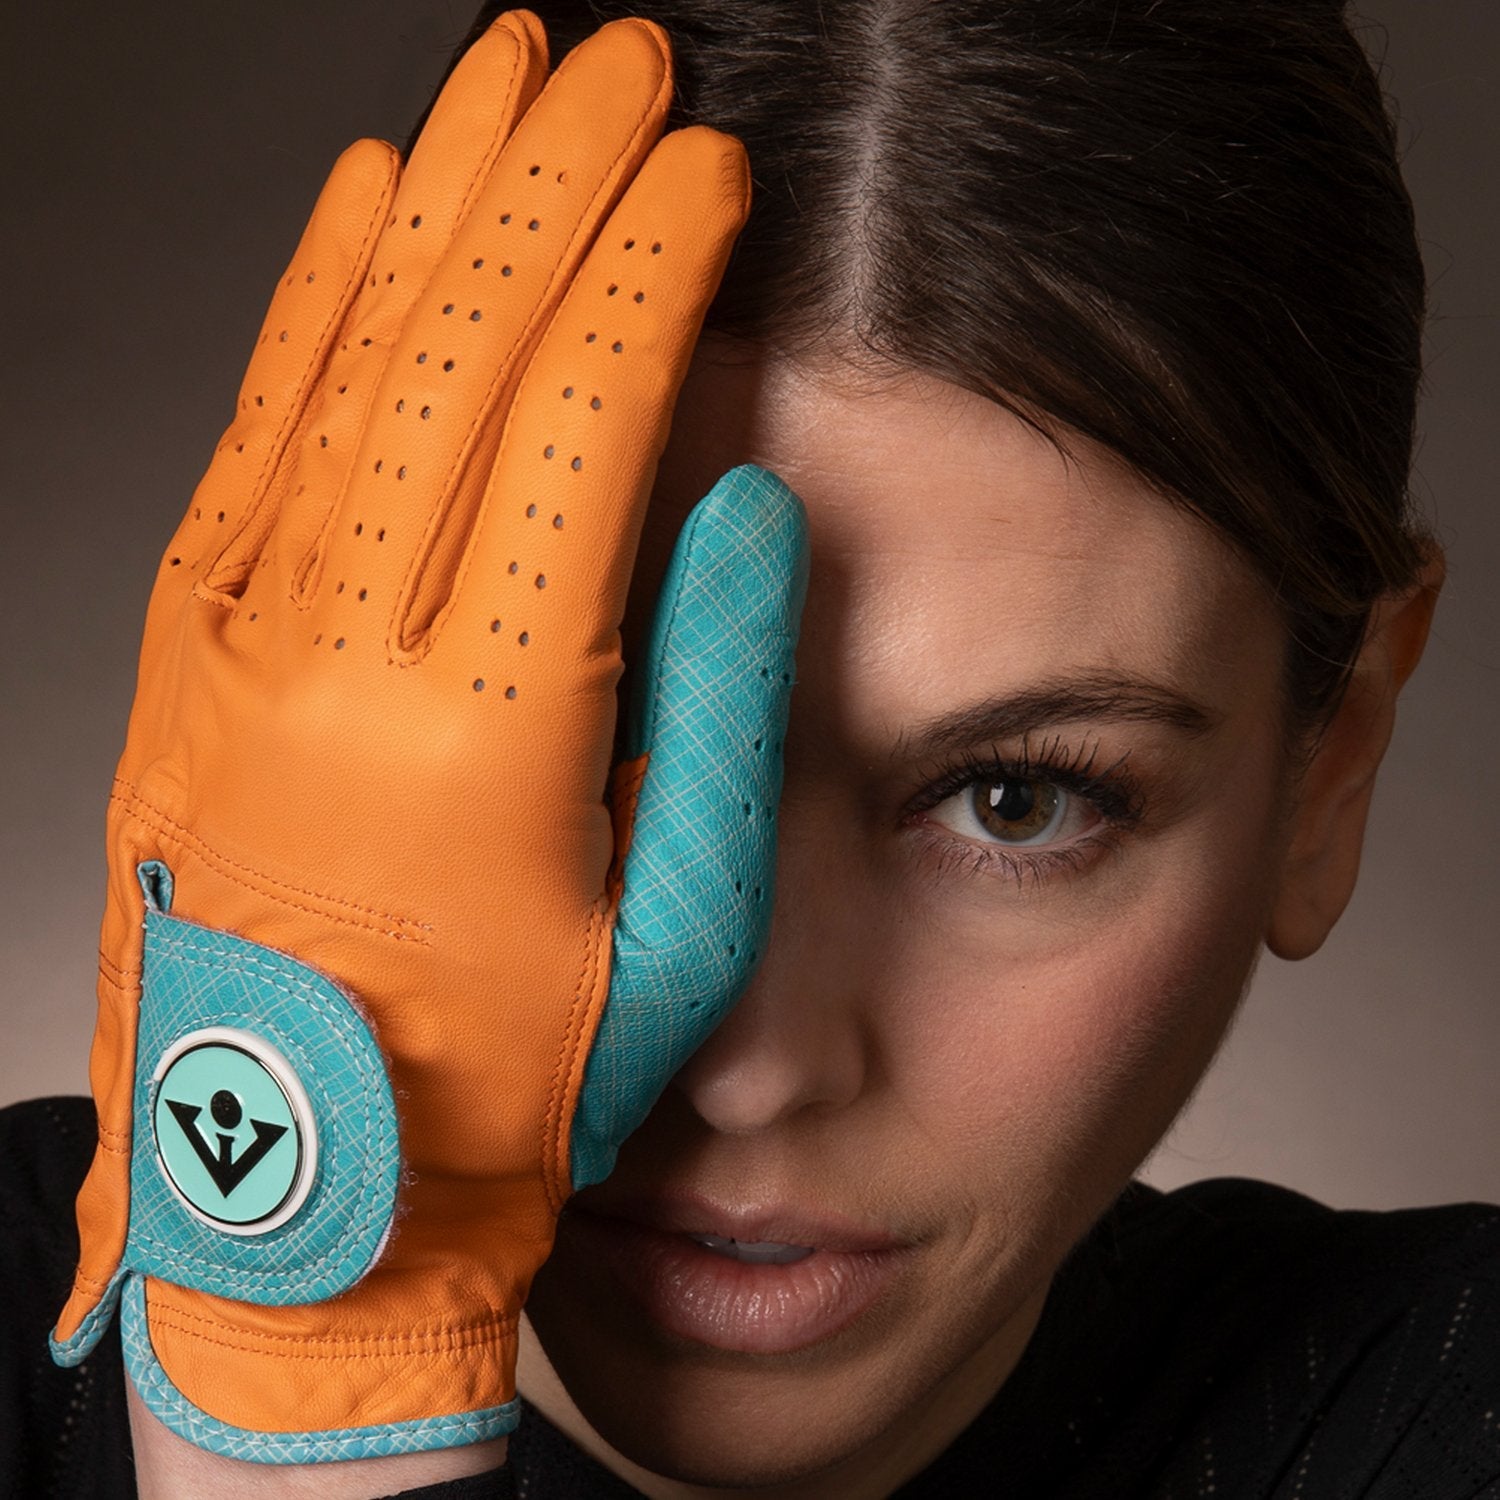 Woman holding a VivanTee Golf orange and blue accented golf glove in front of her eye staring into the camera up close.